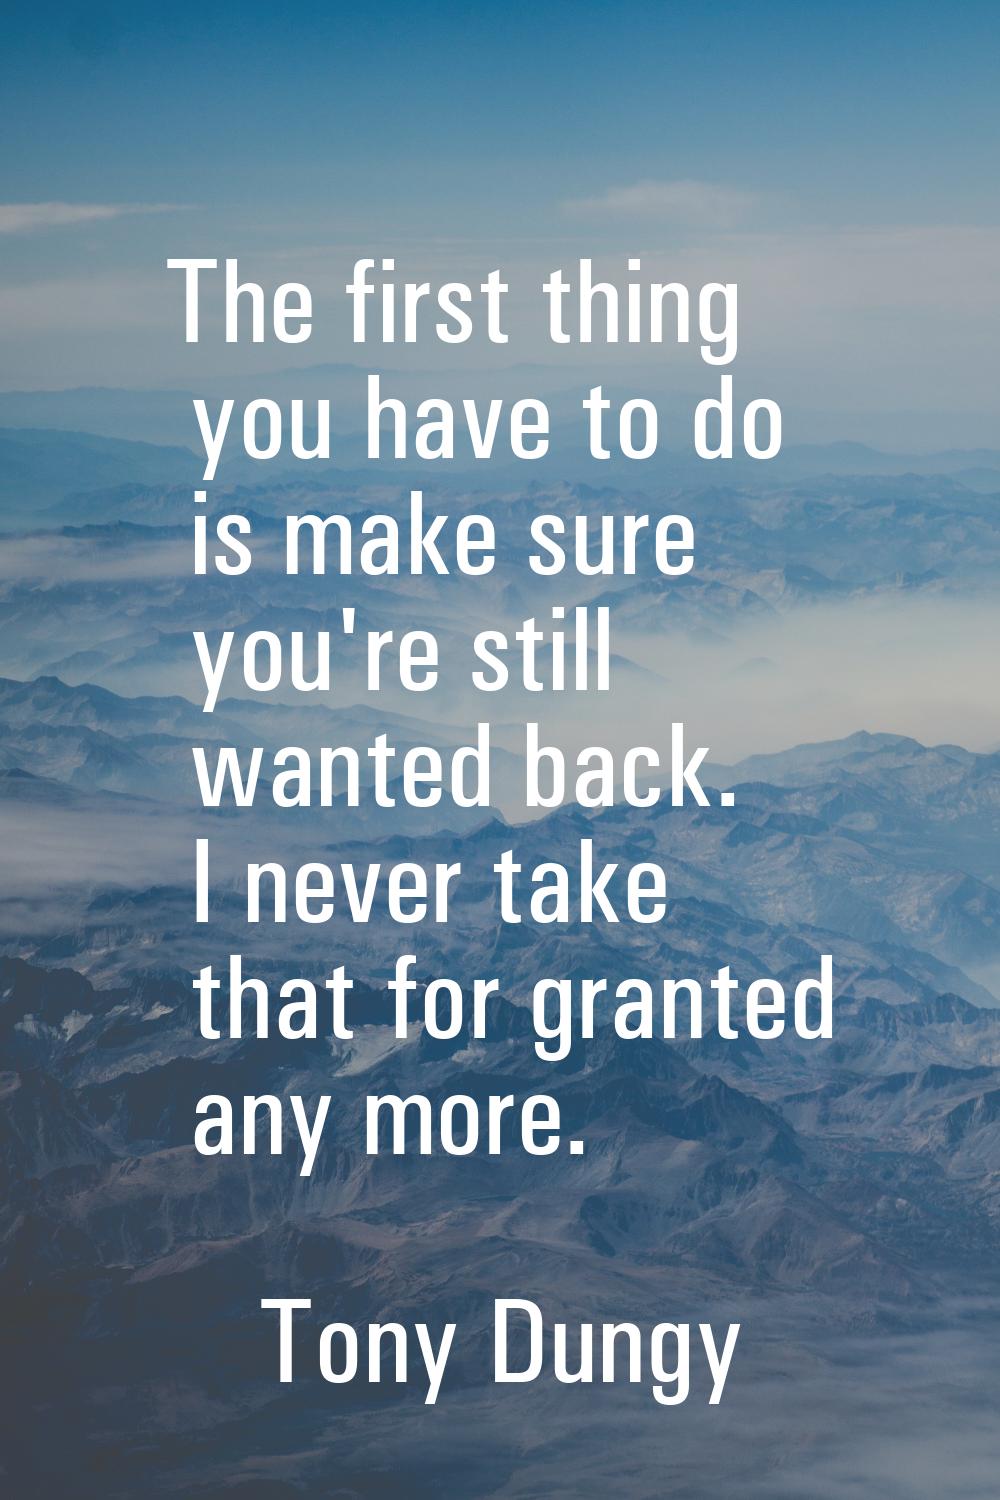 The first thing you have to do is make sure you're still wanted back. I never take that for granted